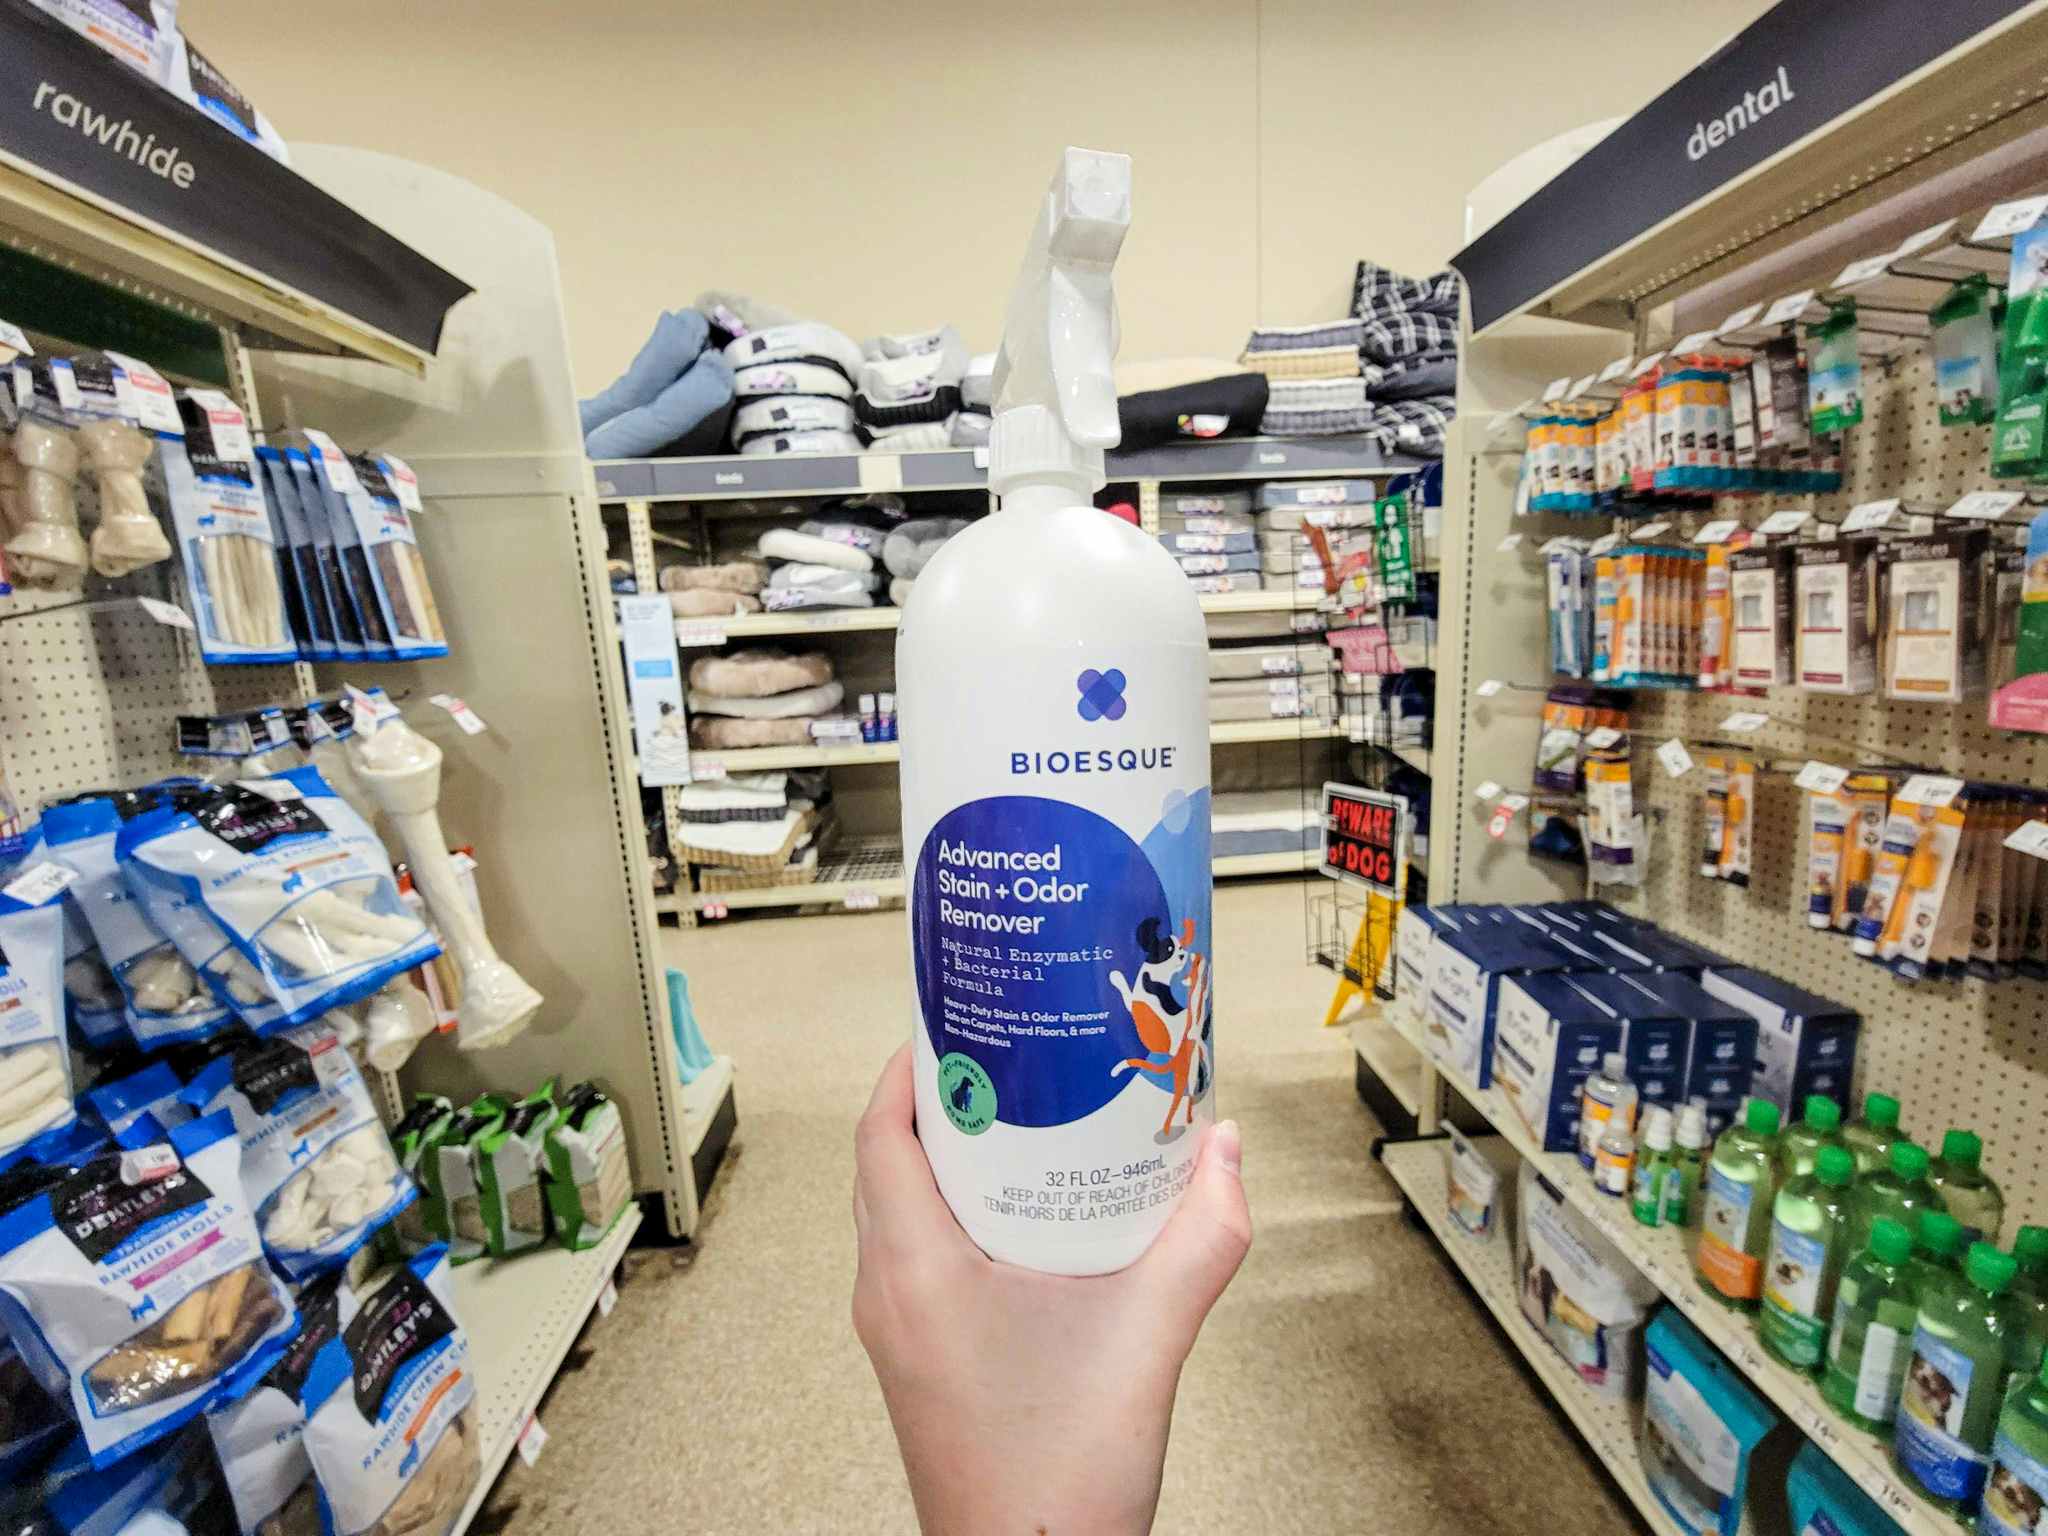 hand holding a bottle of bioesque advanced stain & odor remover in an aisle